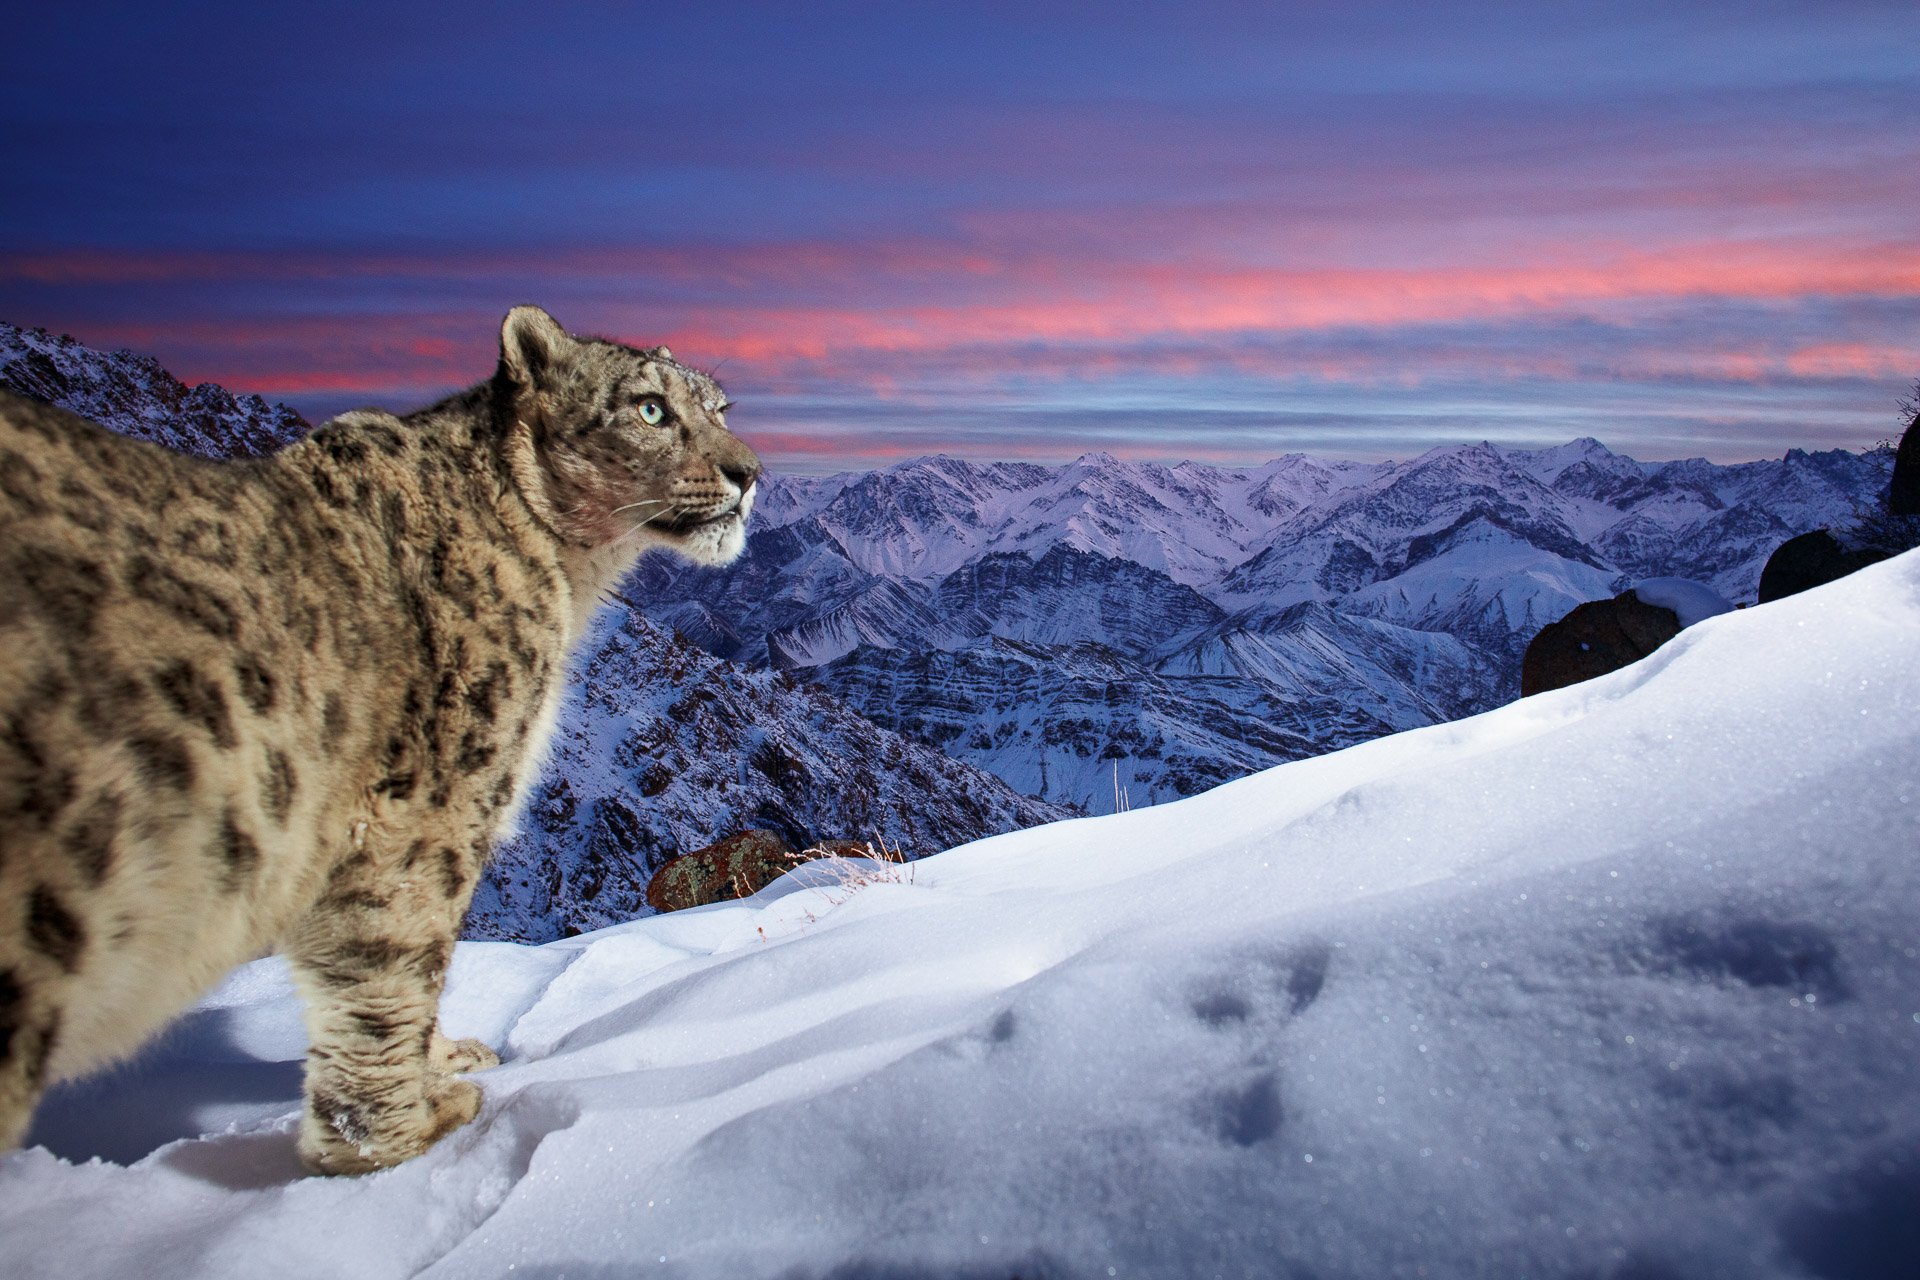 A snow leopard scans for prey across the jagged peaks of the Ladakh mountain range in India.